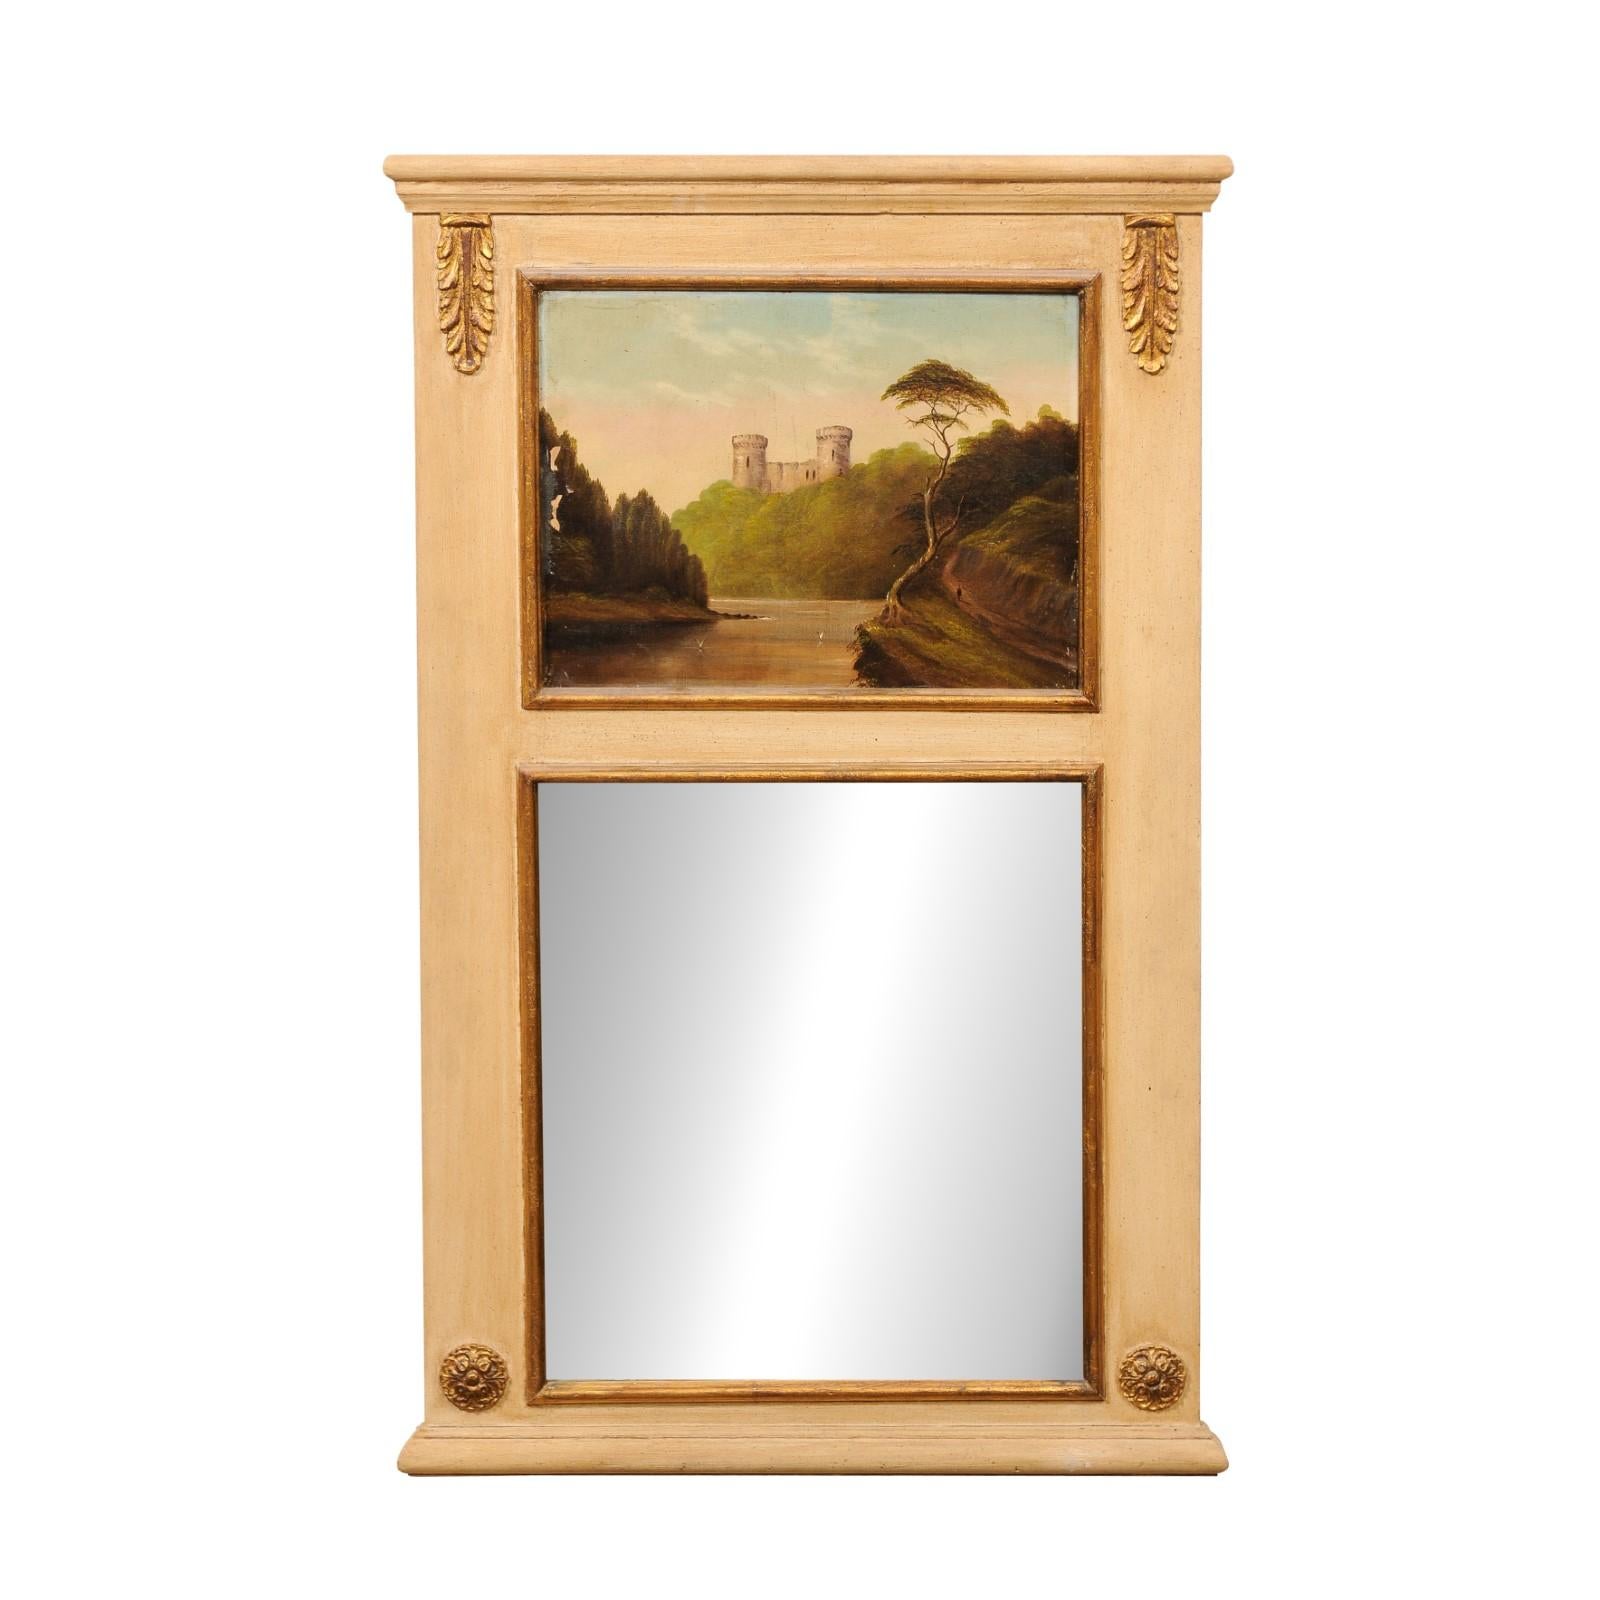 Small Trumeau Mirror with 19th Century Landscape Painting, France For Sale 2